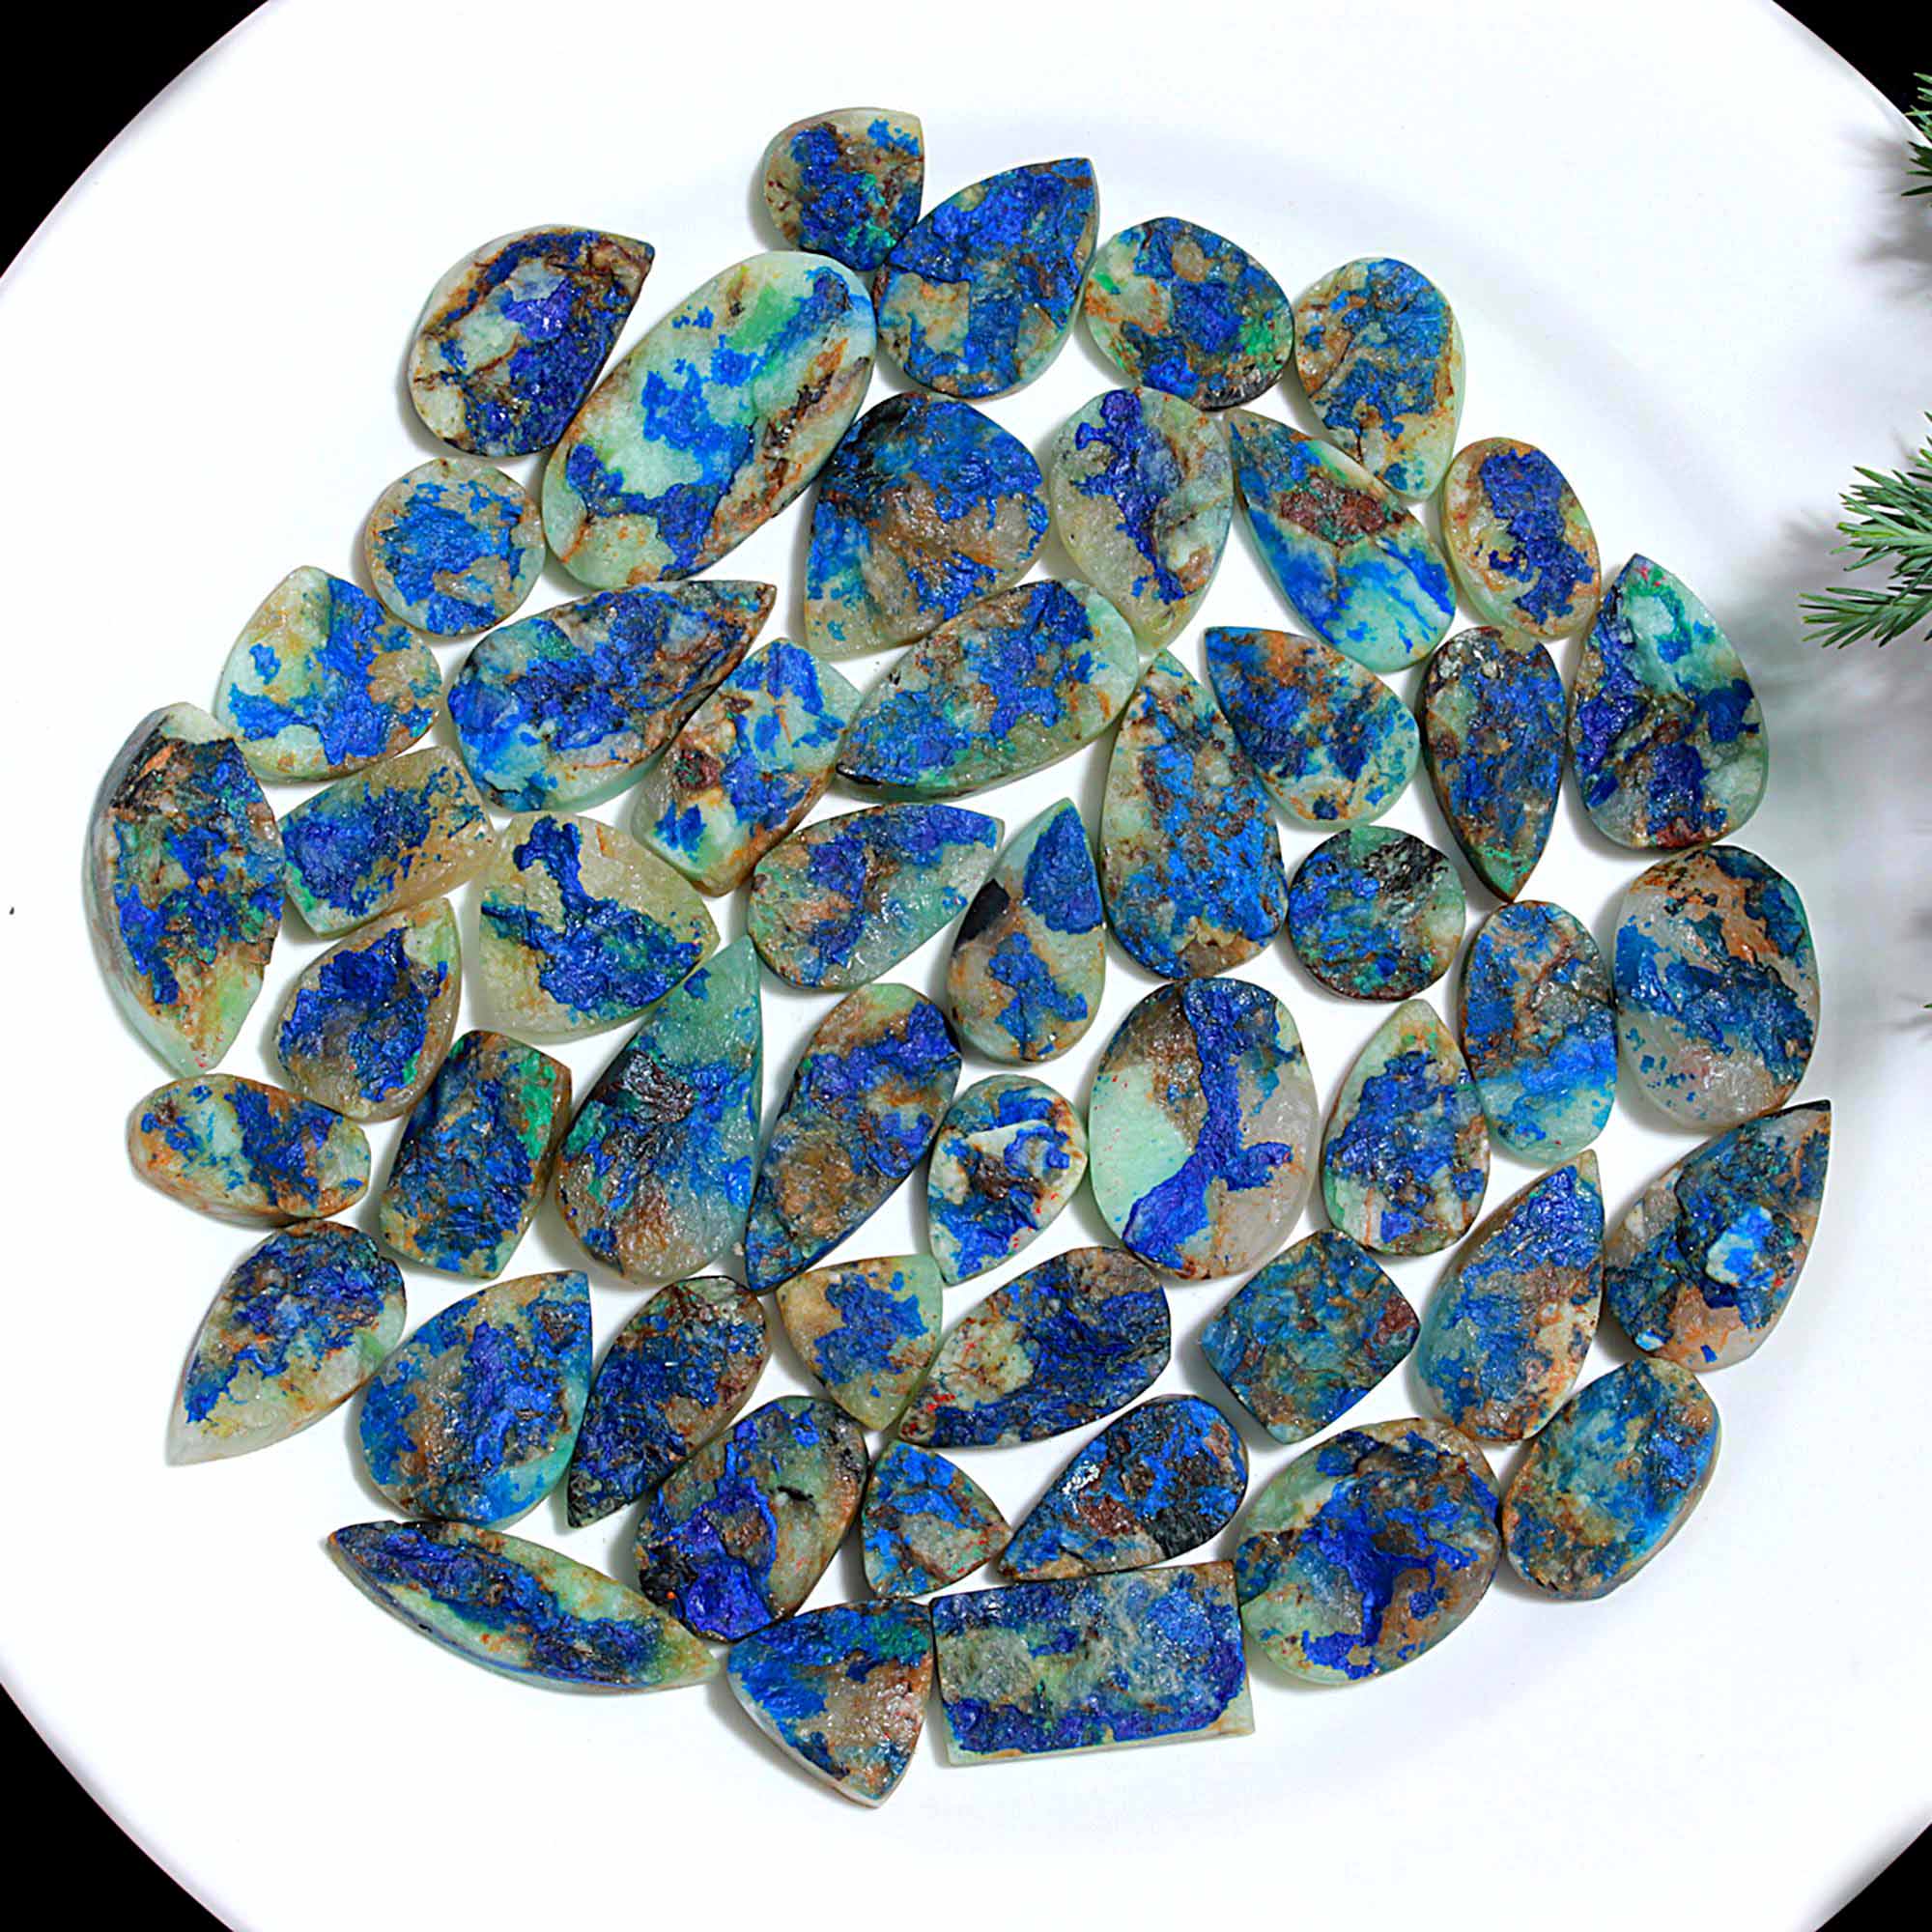 51 Pcs 700.Cts Natural Azurite Druzy Unpolished Loose Cabochon Gemstone For Jewelry Wholesale Lot Size 31x17 13x12mm